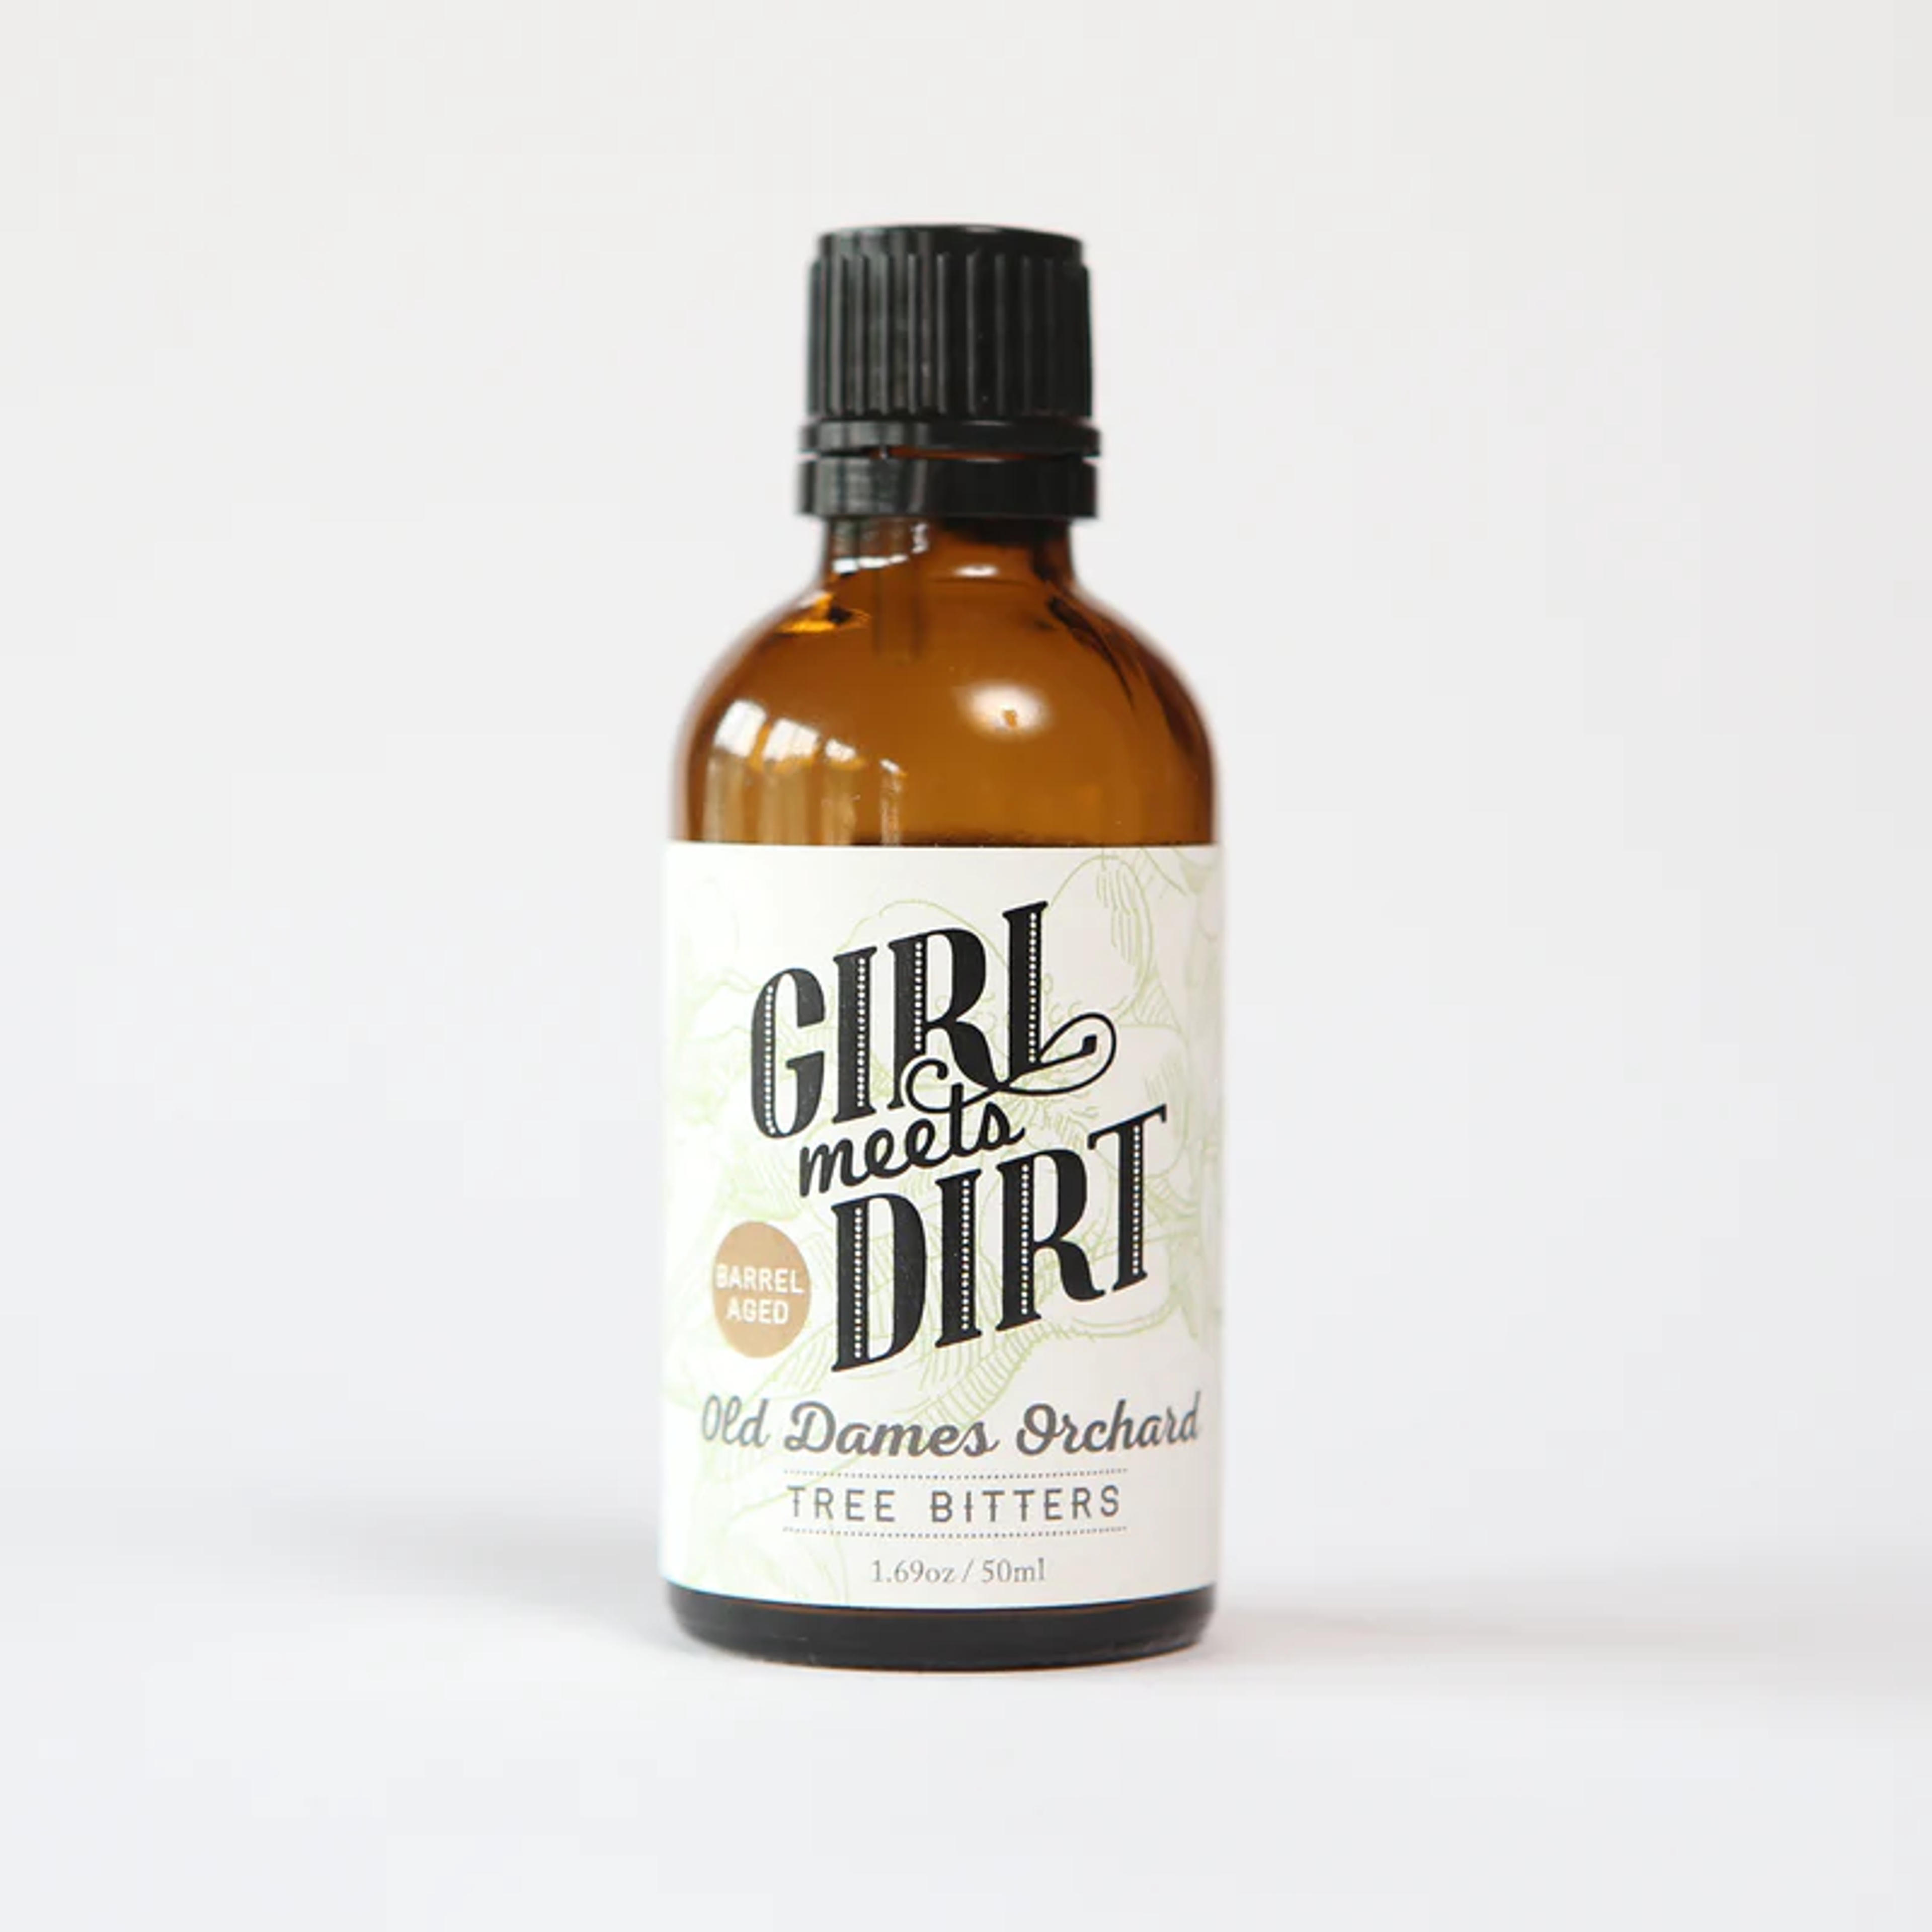 Old Dames Orchard Tree Bitters | Girl Meets Dirt